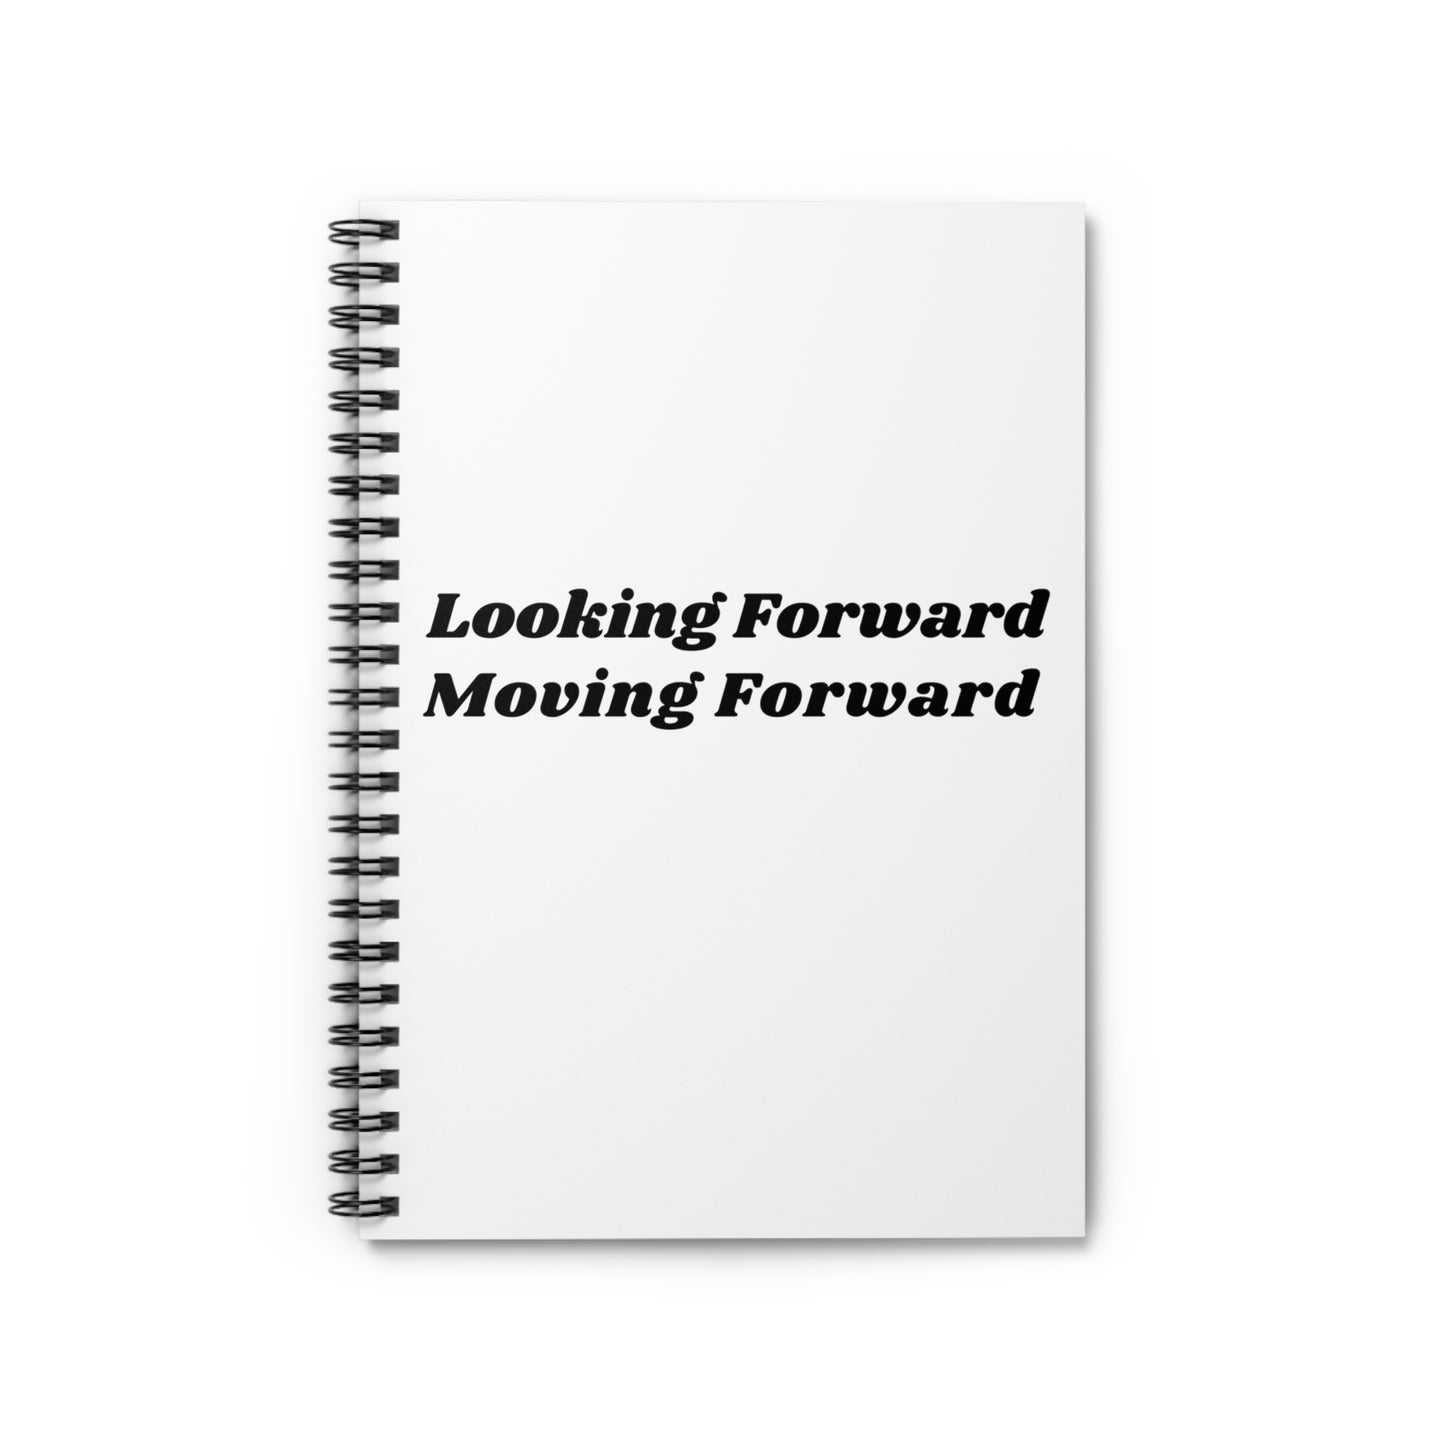 Looking Forward Spiral Notebook - Ruled Line